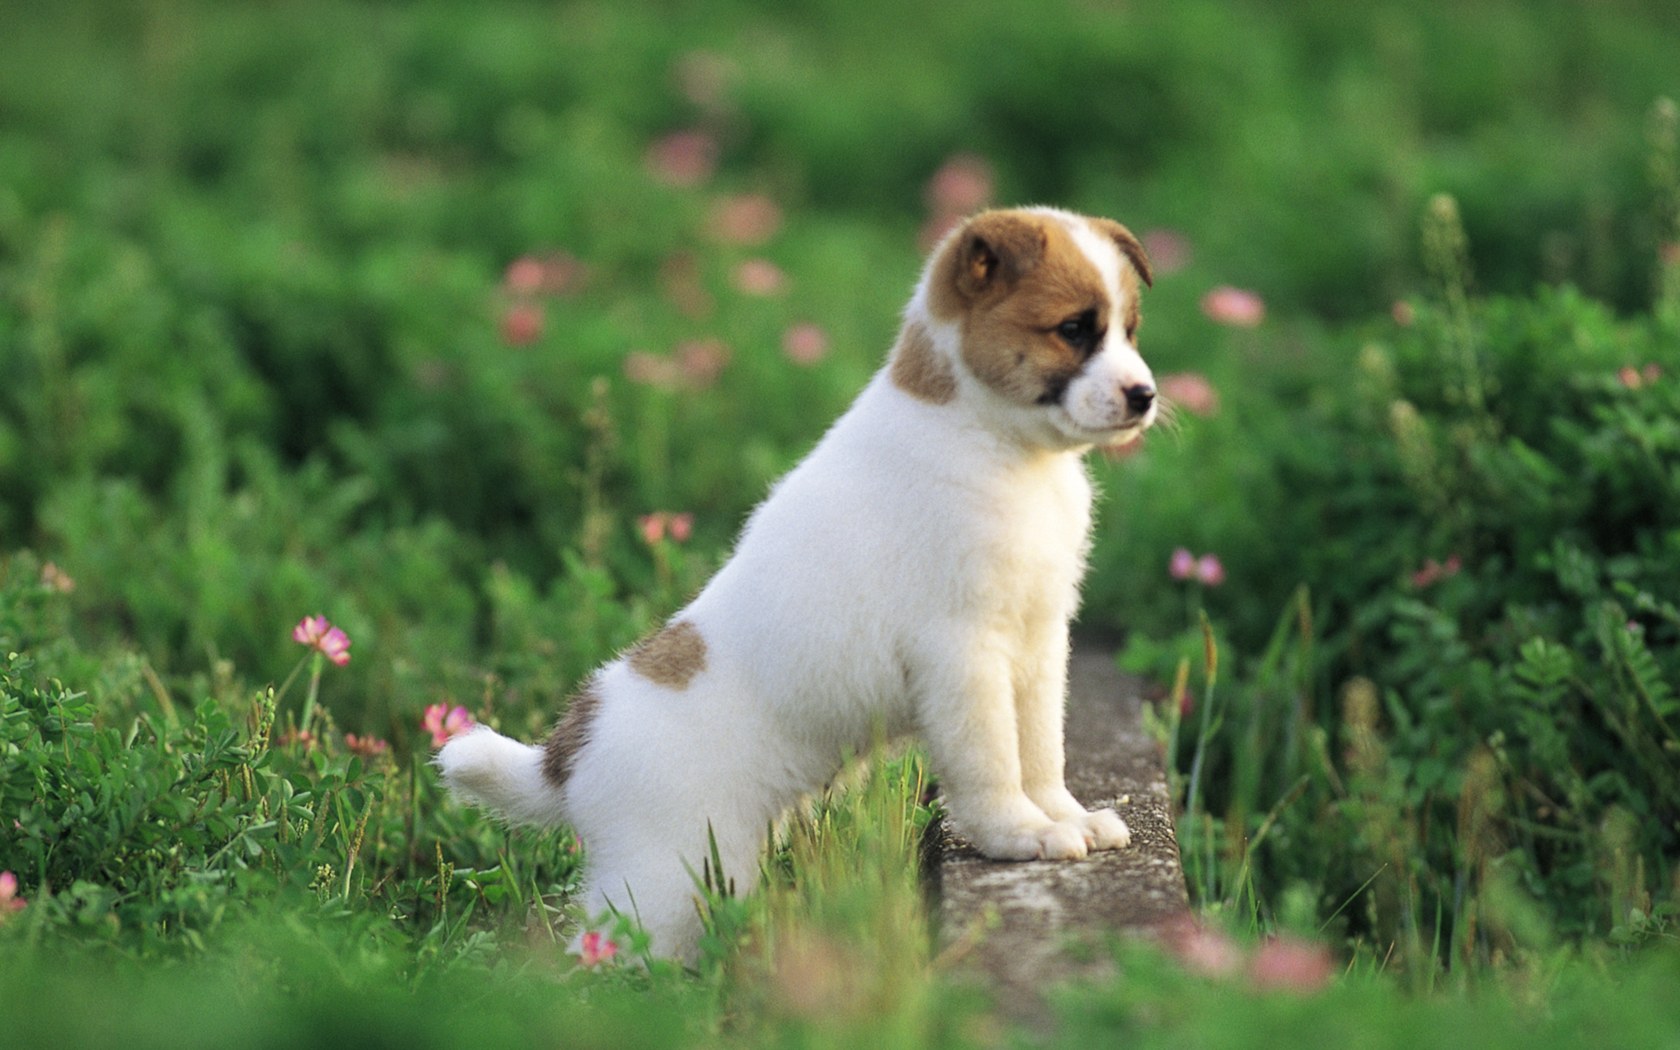 Cute puppy in a park, puppy dog on grass, Lovely puppies outdoor